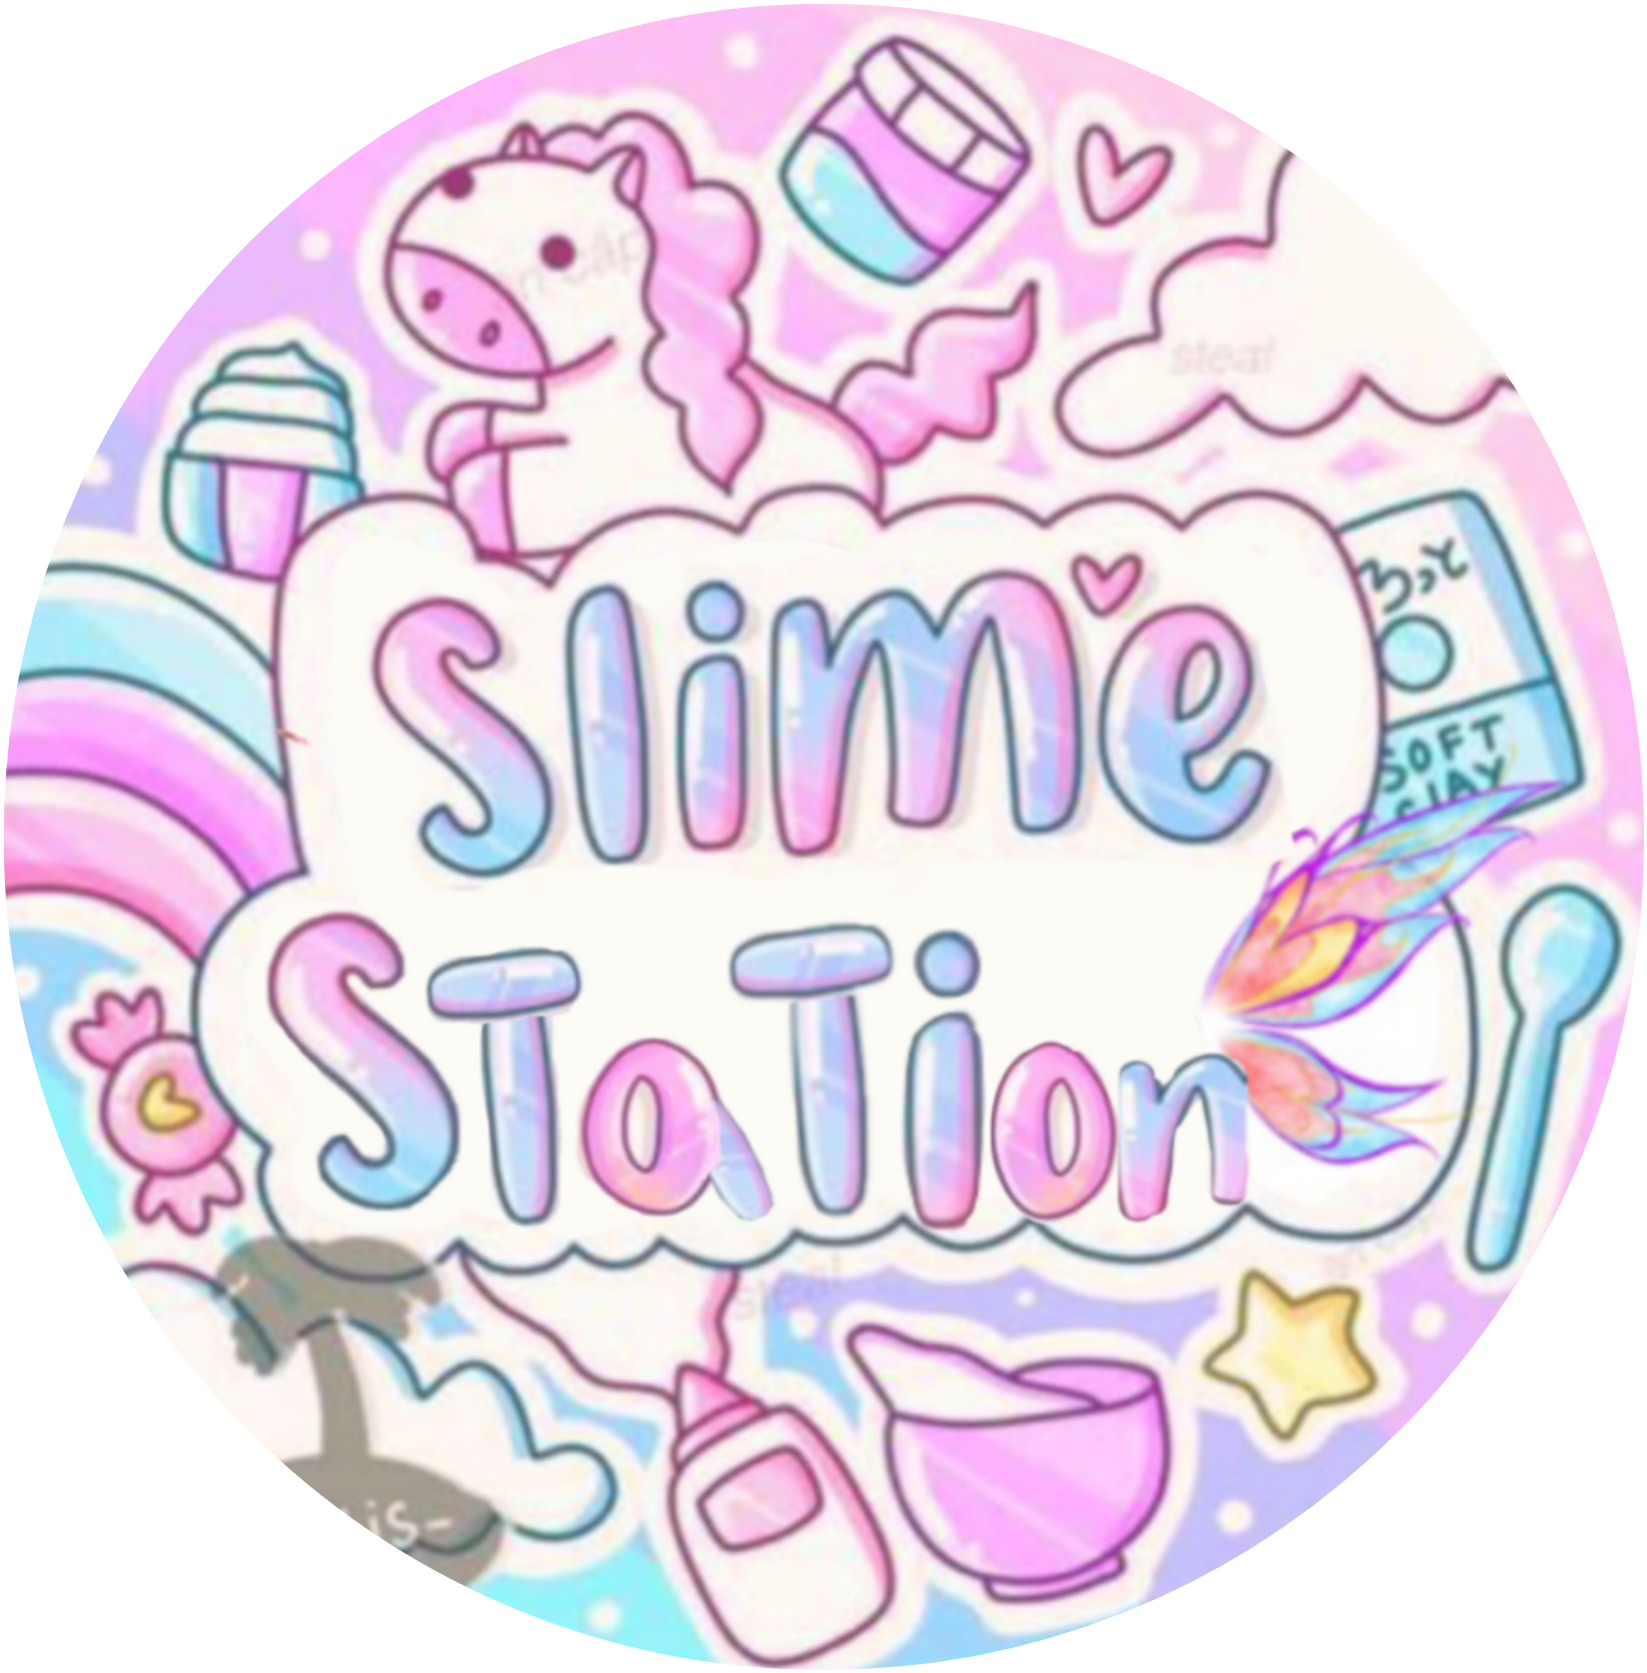 This visual is about slime slimelogo slimelogotip надписьслайм слаймфирма f...